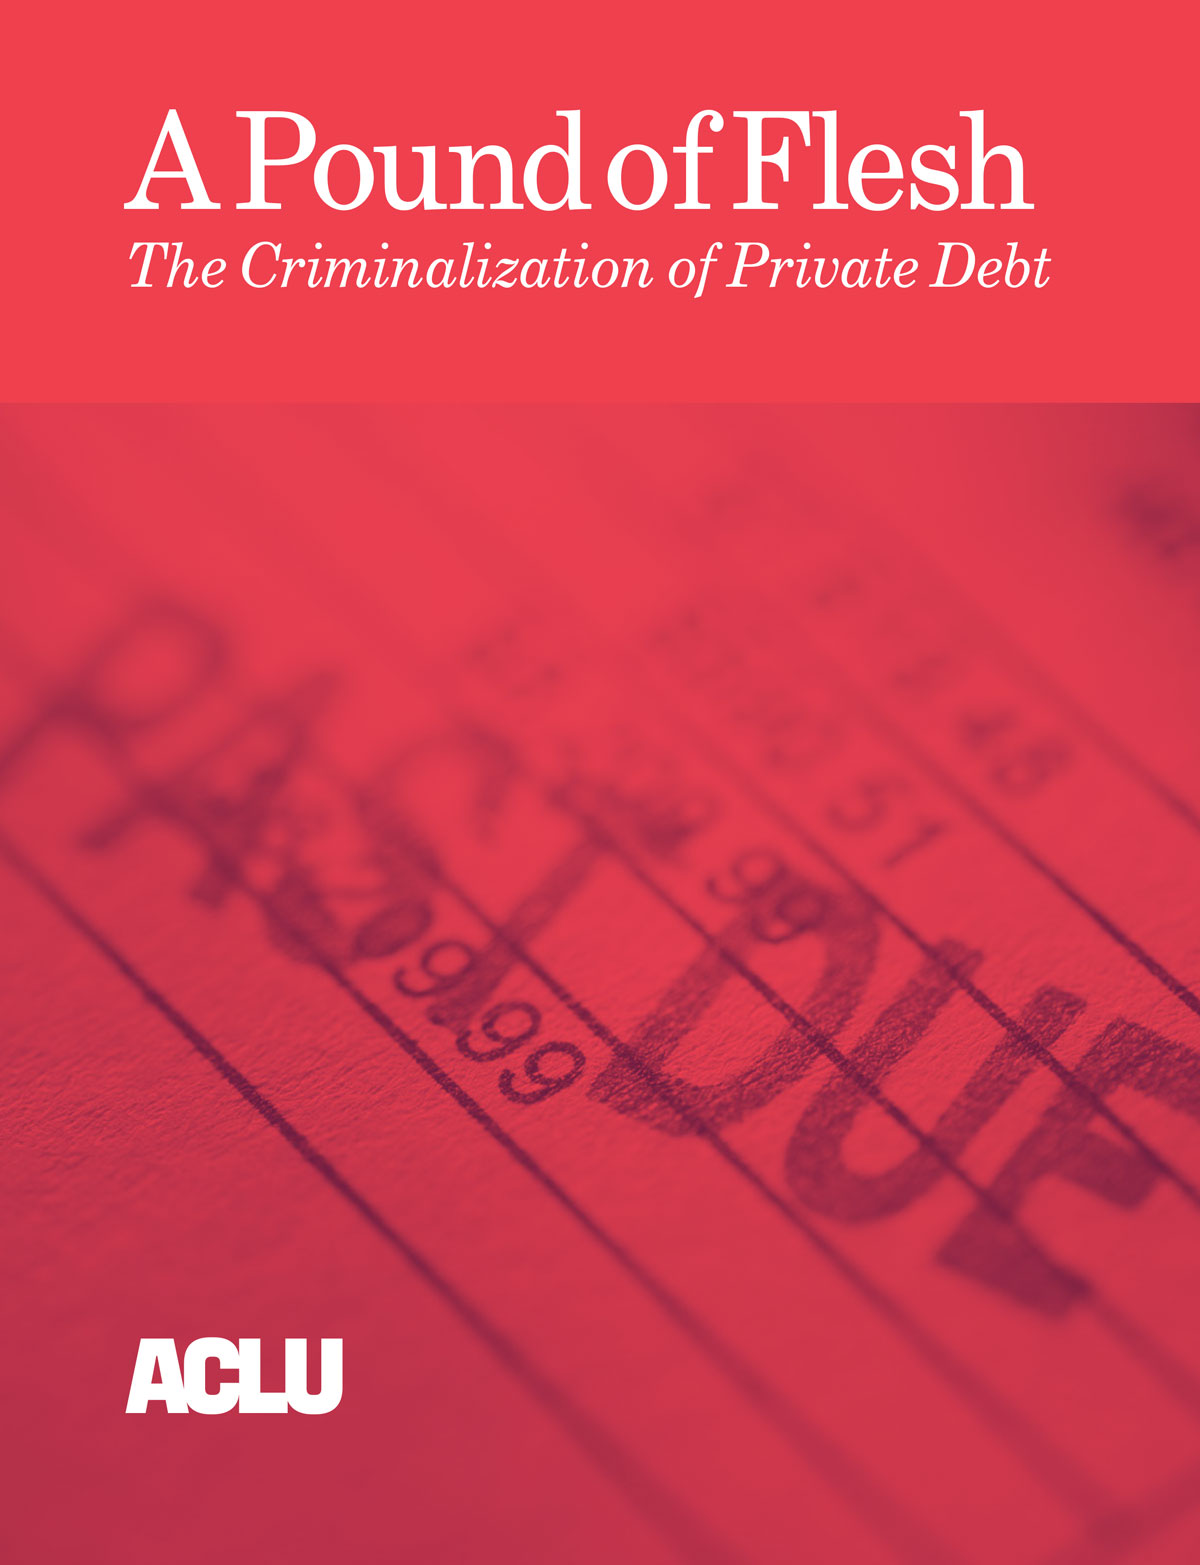 A Pound of Flesh: The Criminalization of Private Debt